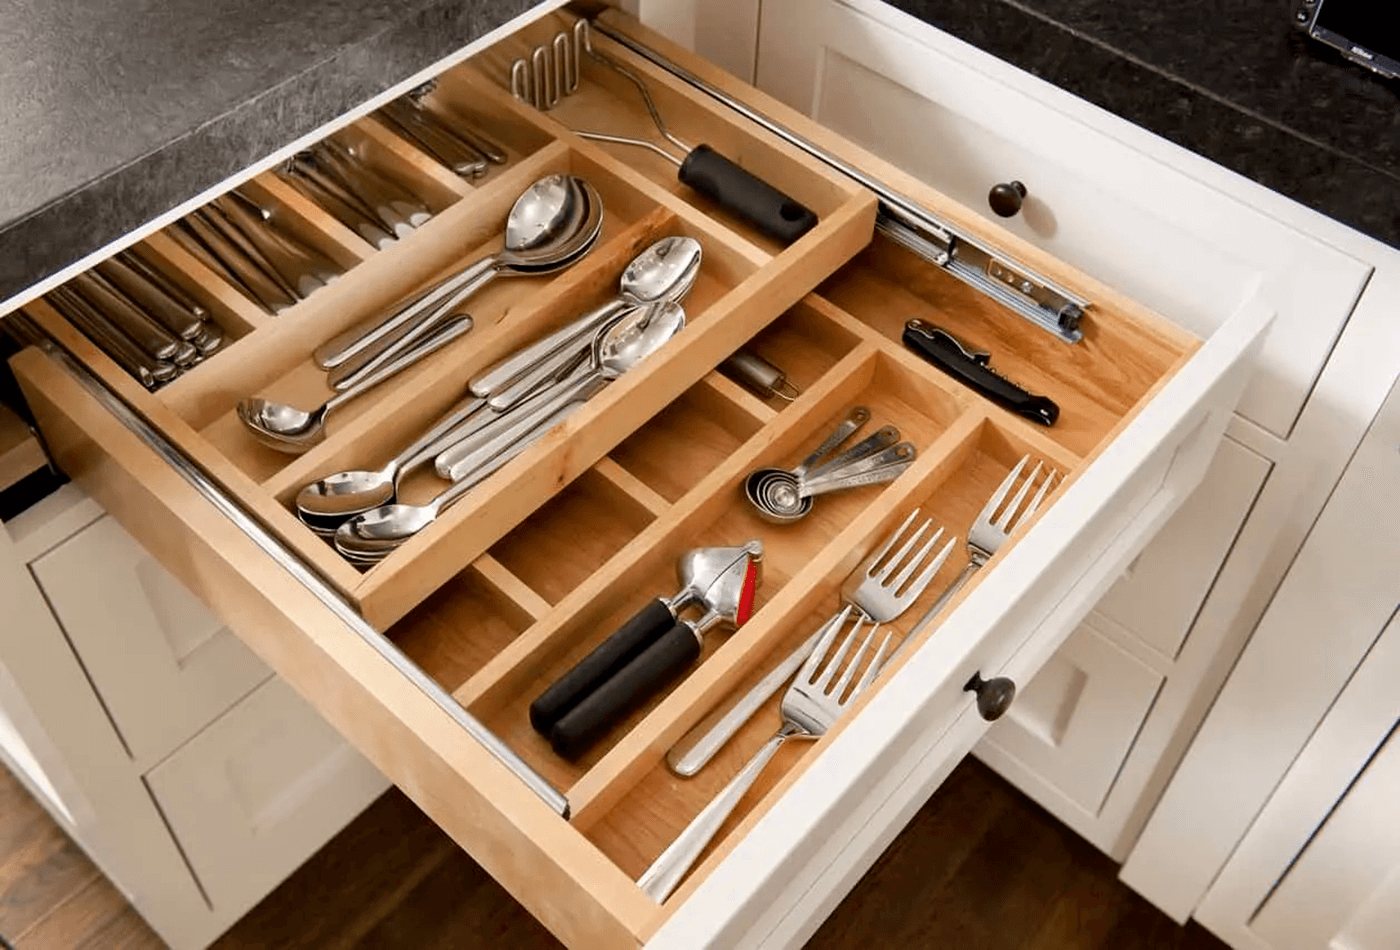 5 Easy Step To Organise Cooking Vessels In Your Kitchens